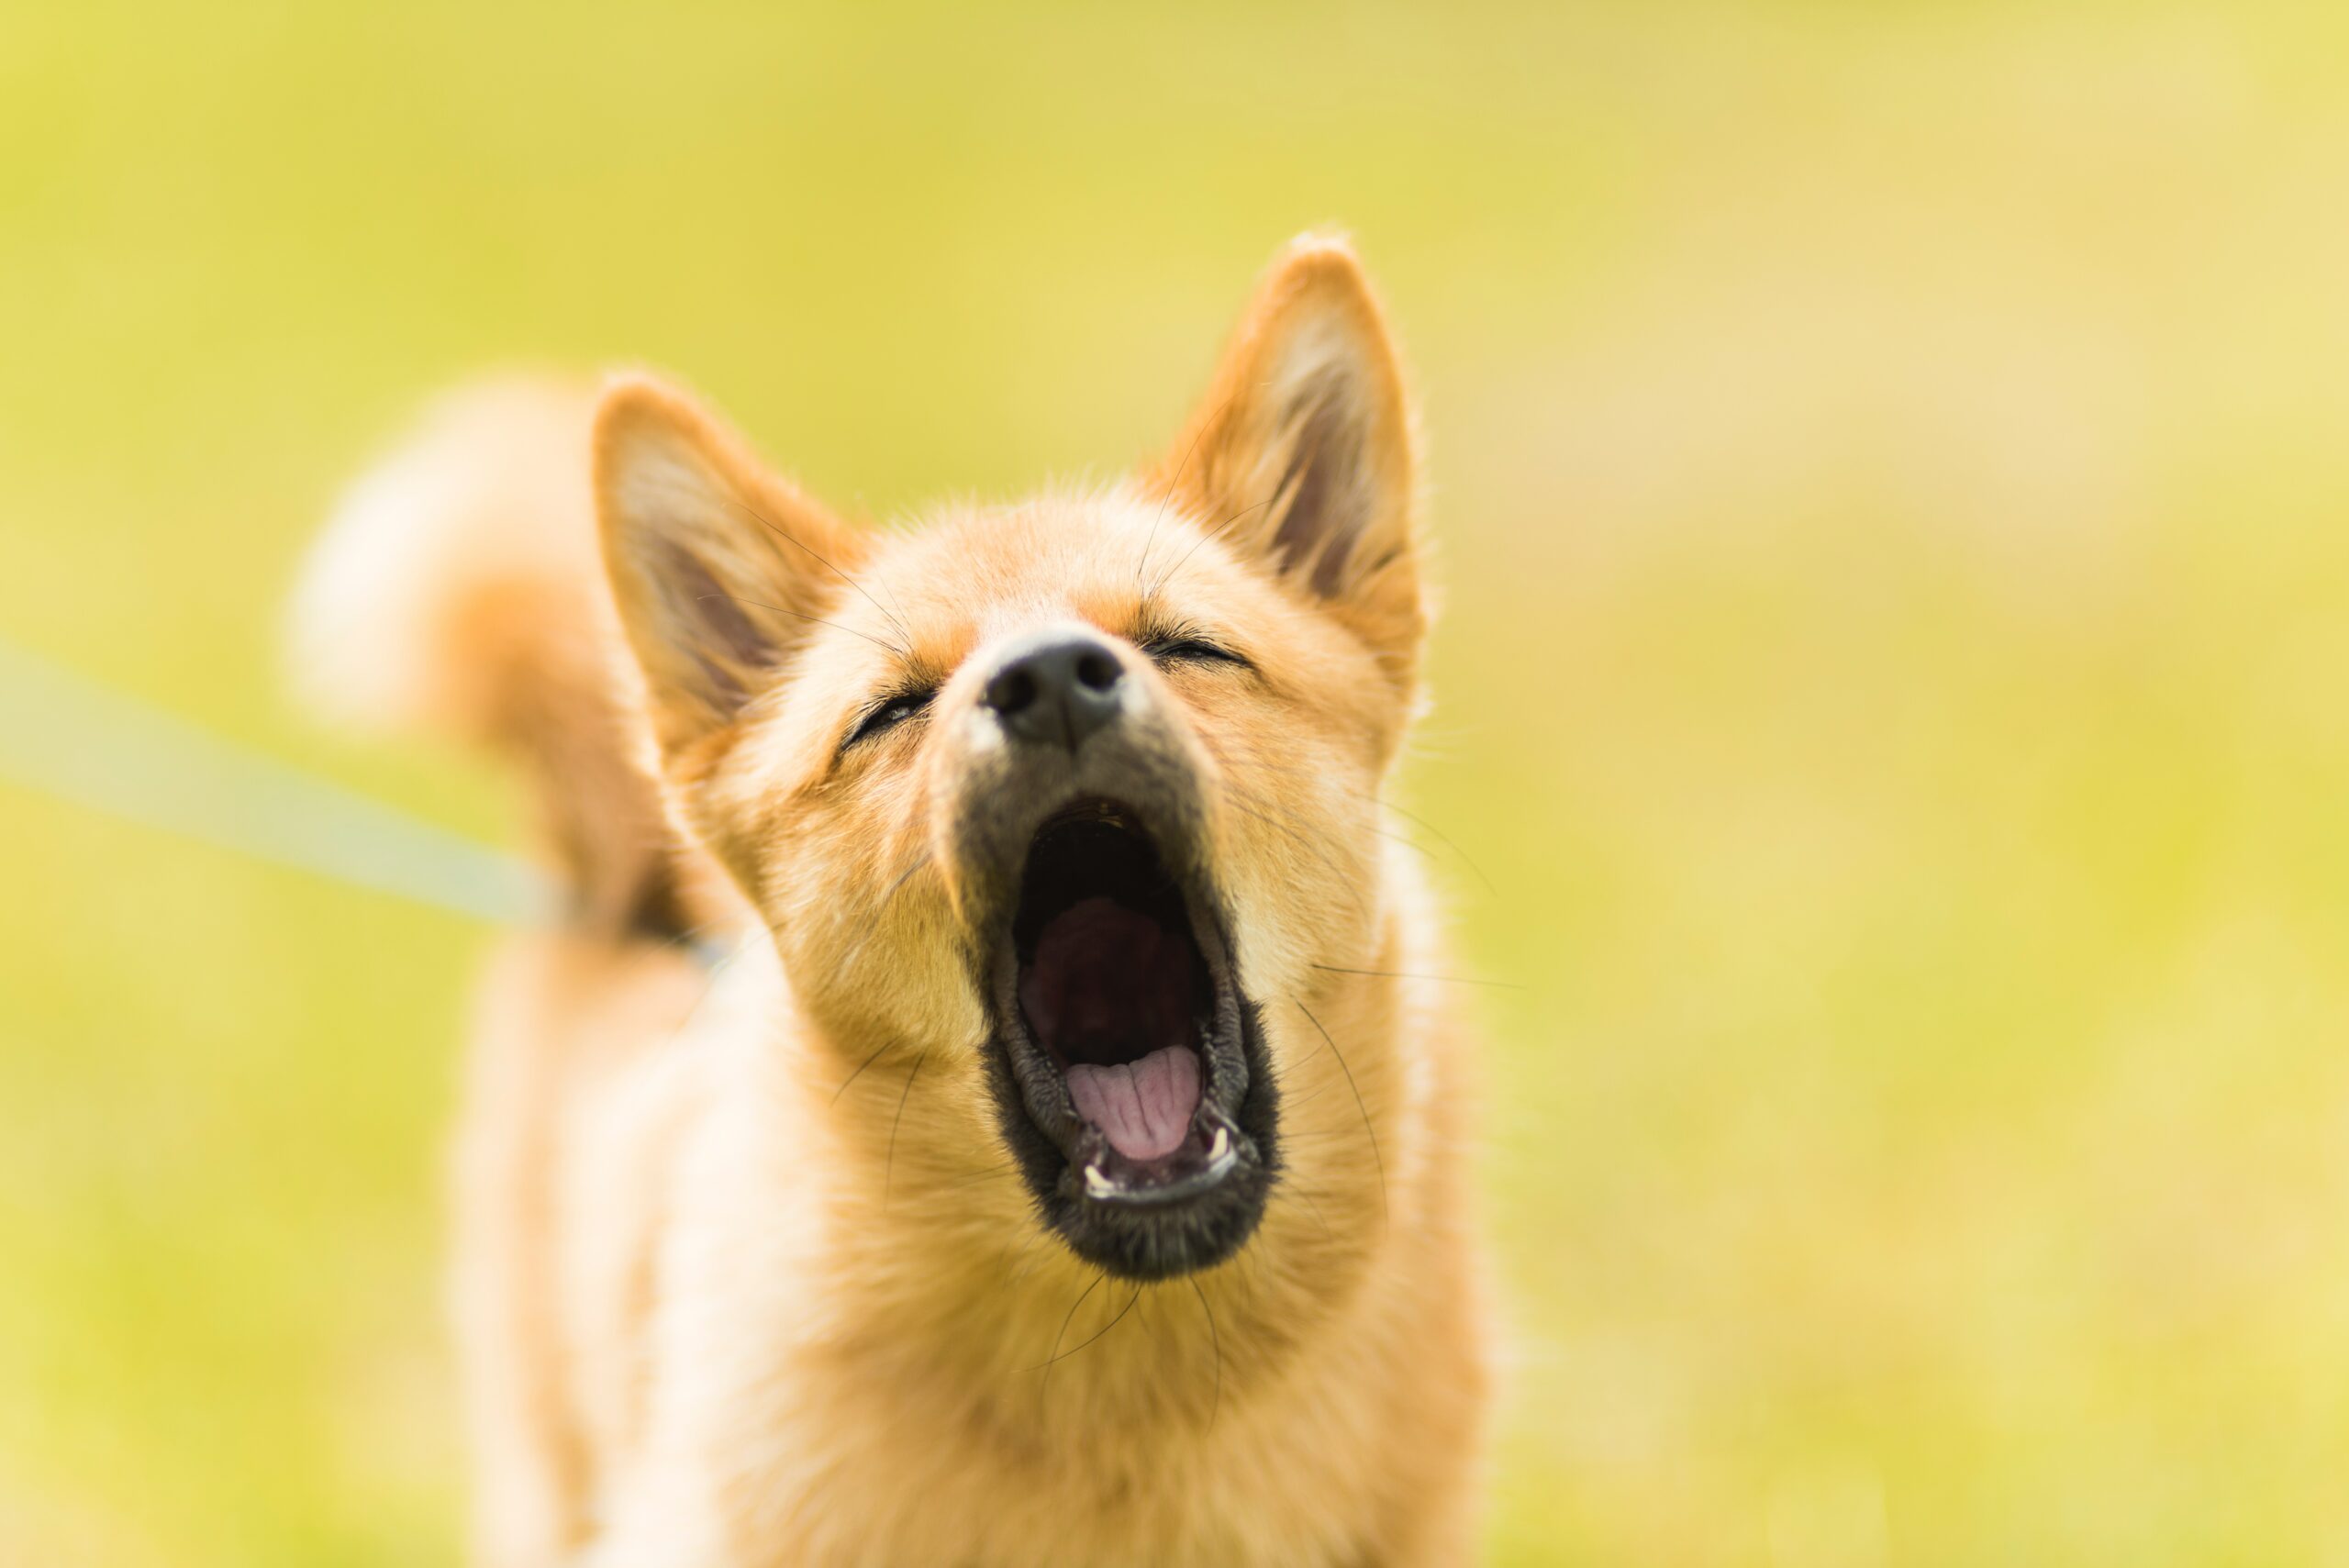 Why Do Dogs Howl? The Psychology Behind Dogs Howling Behavior